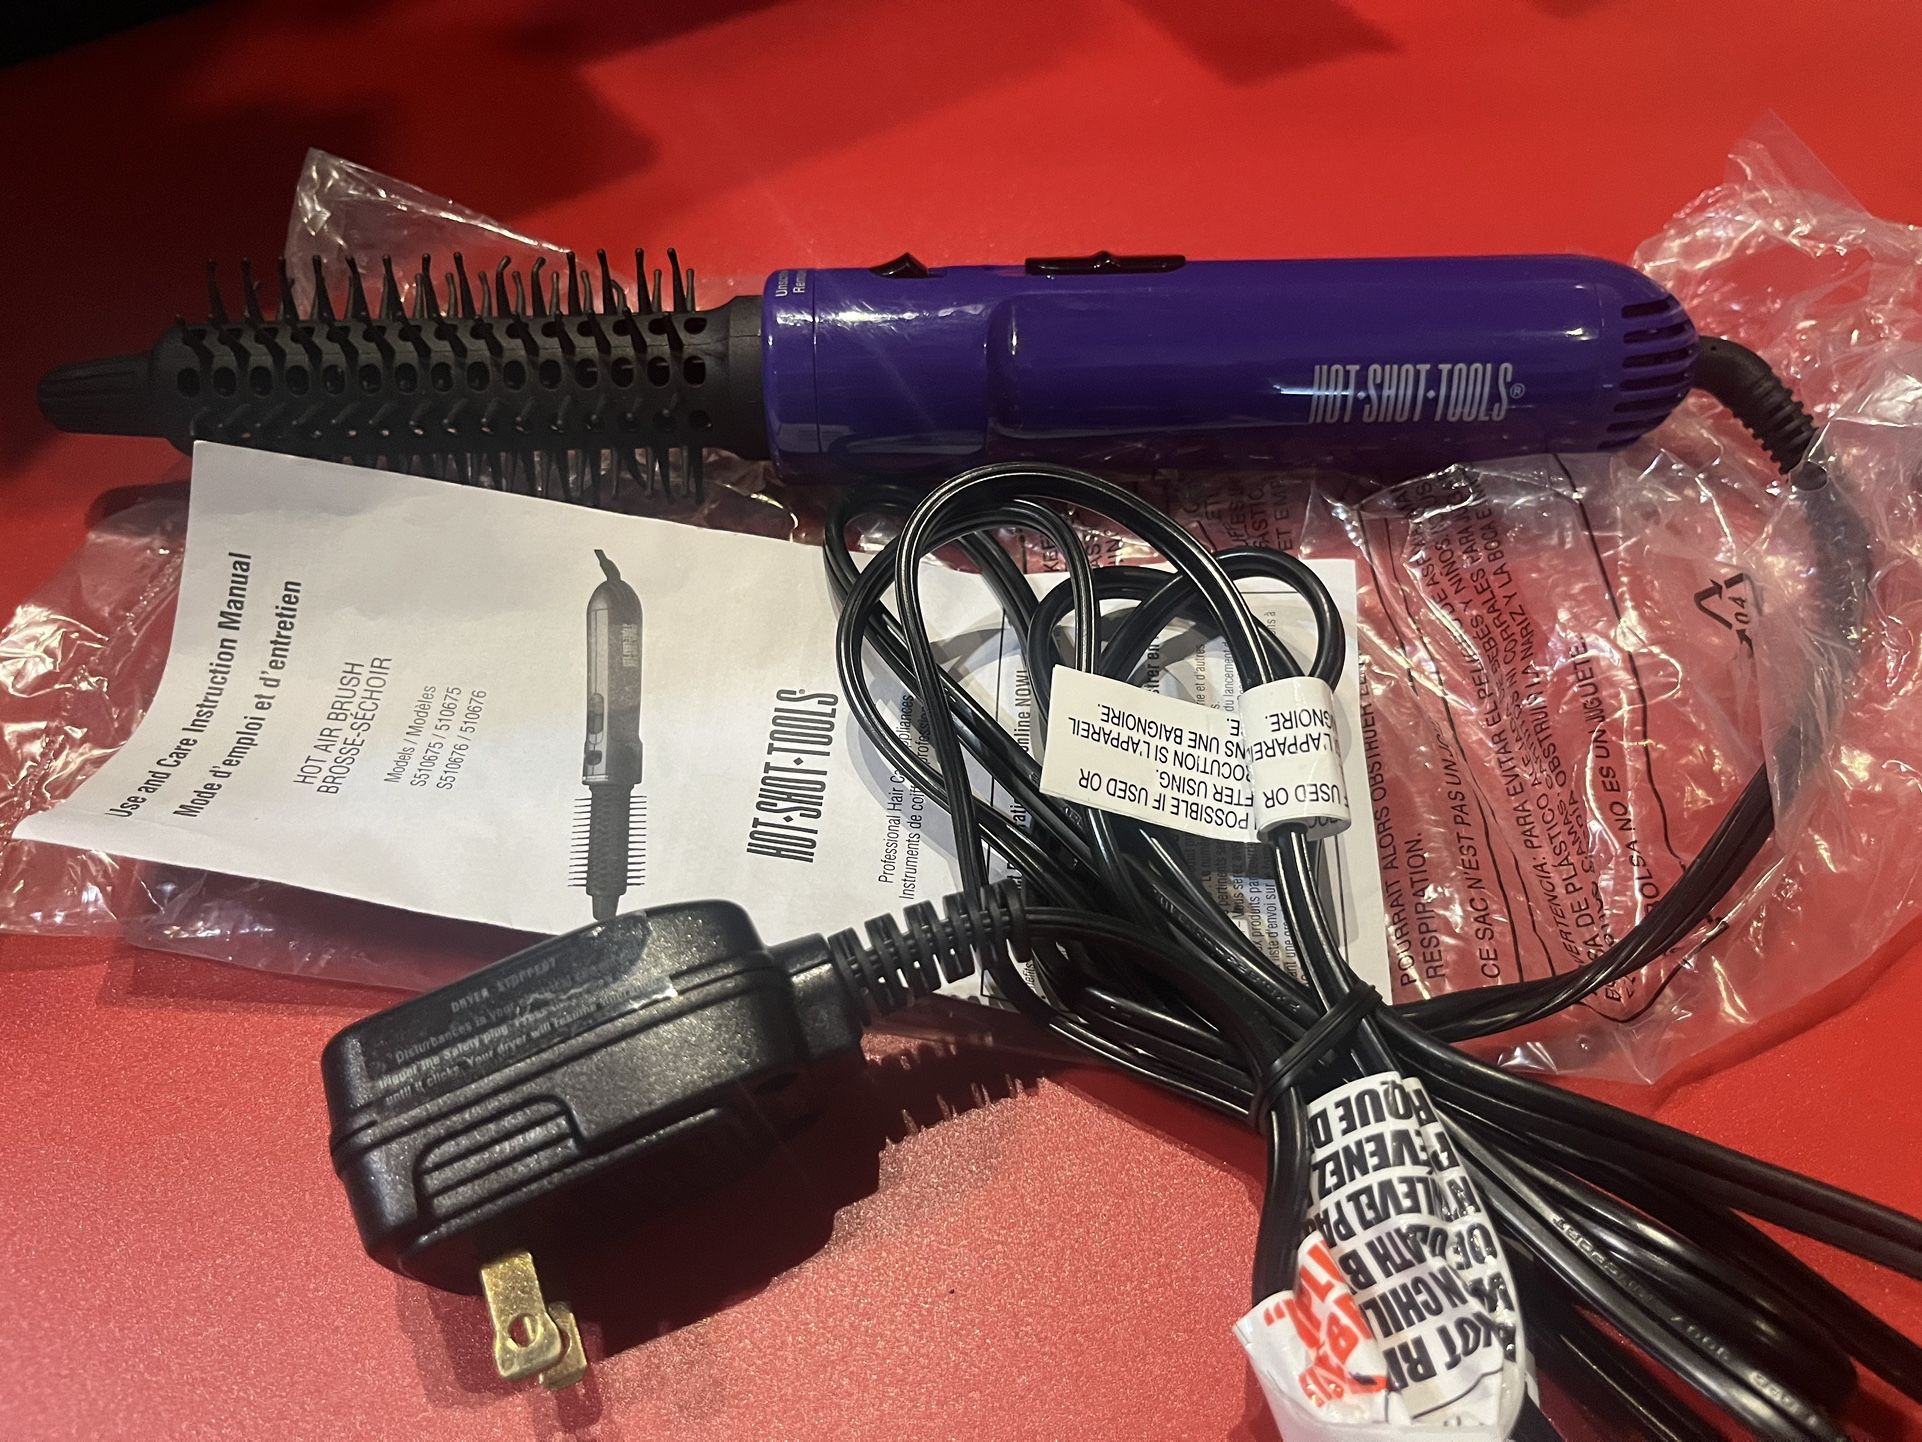 Hot Shot Tools pro artist, hot air styling brush, style curl 1 1/2” Purple